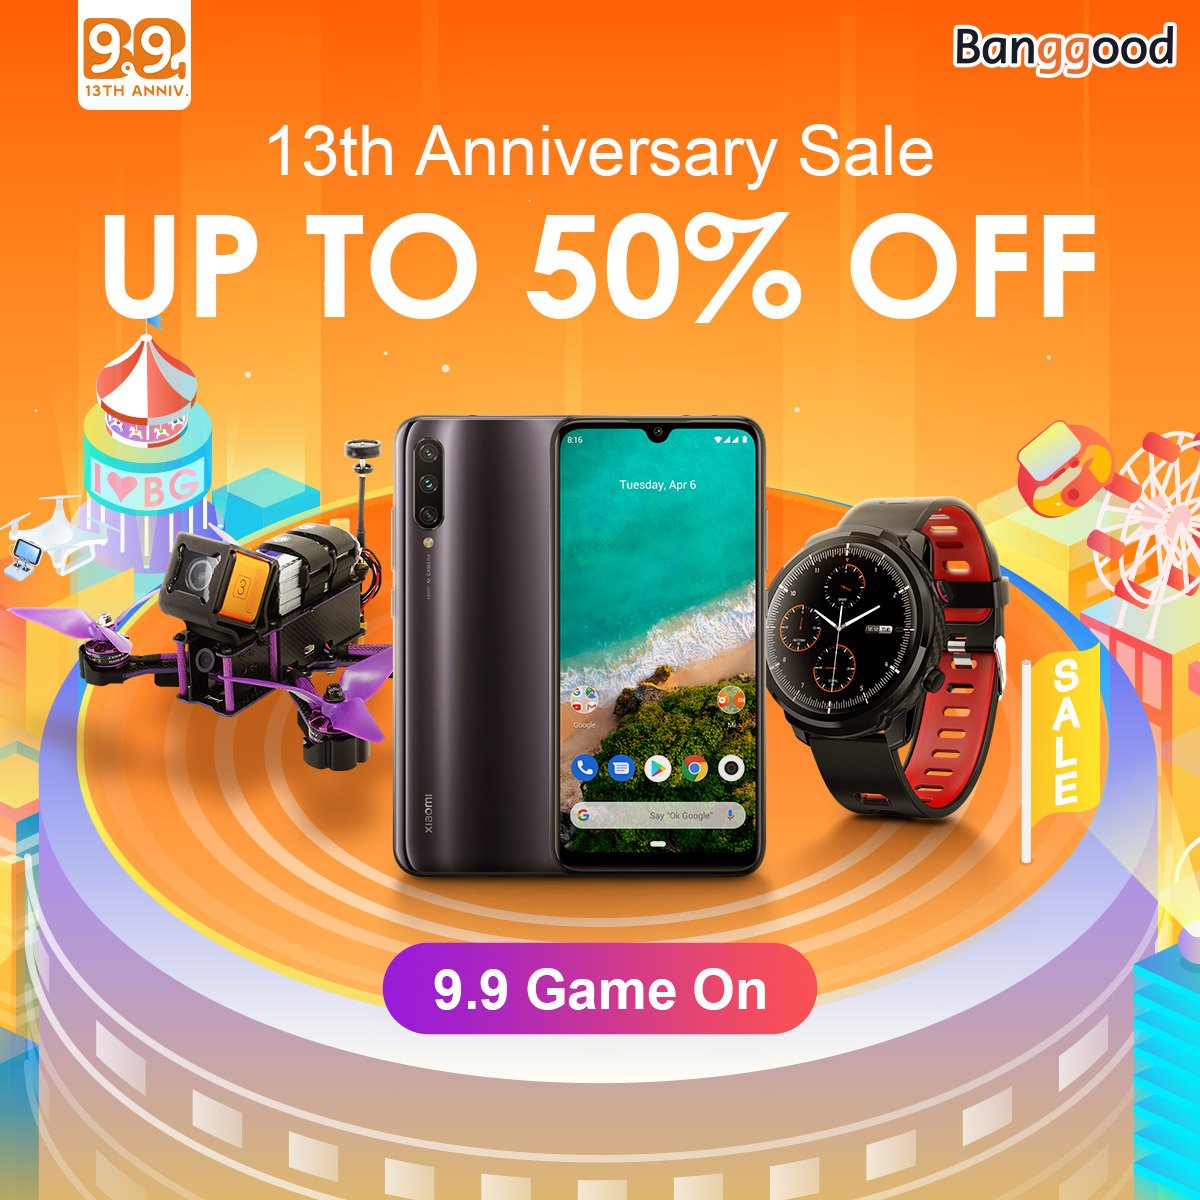 Banggood 13th Anniversary: Greatest Discount Release and Free Gifts